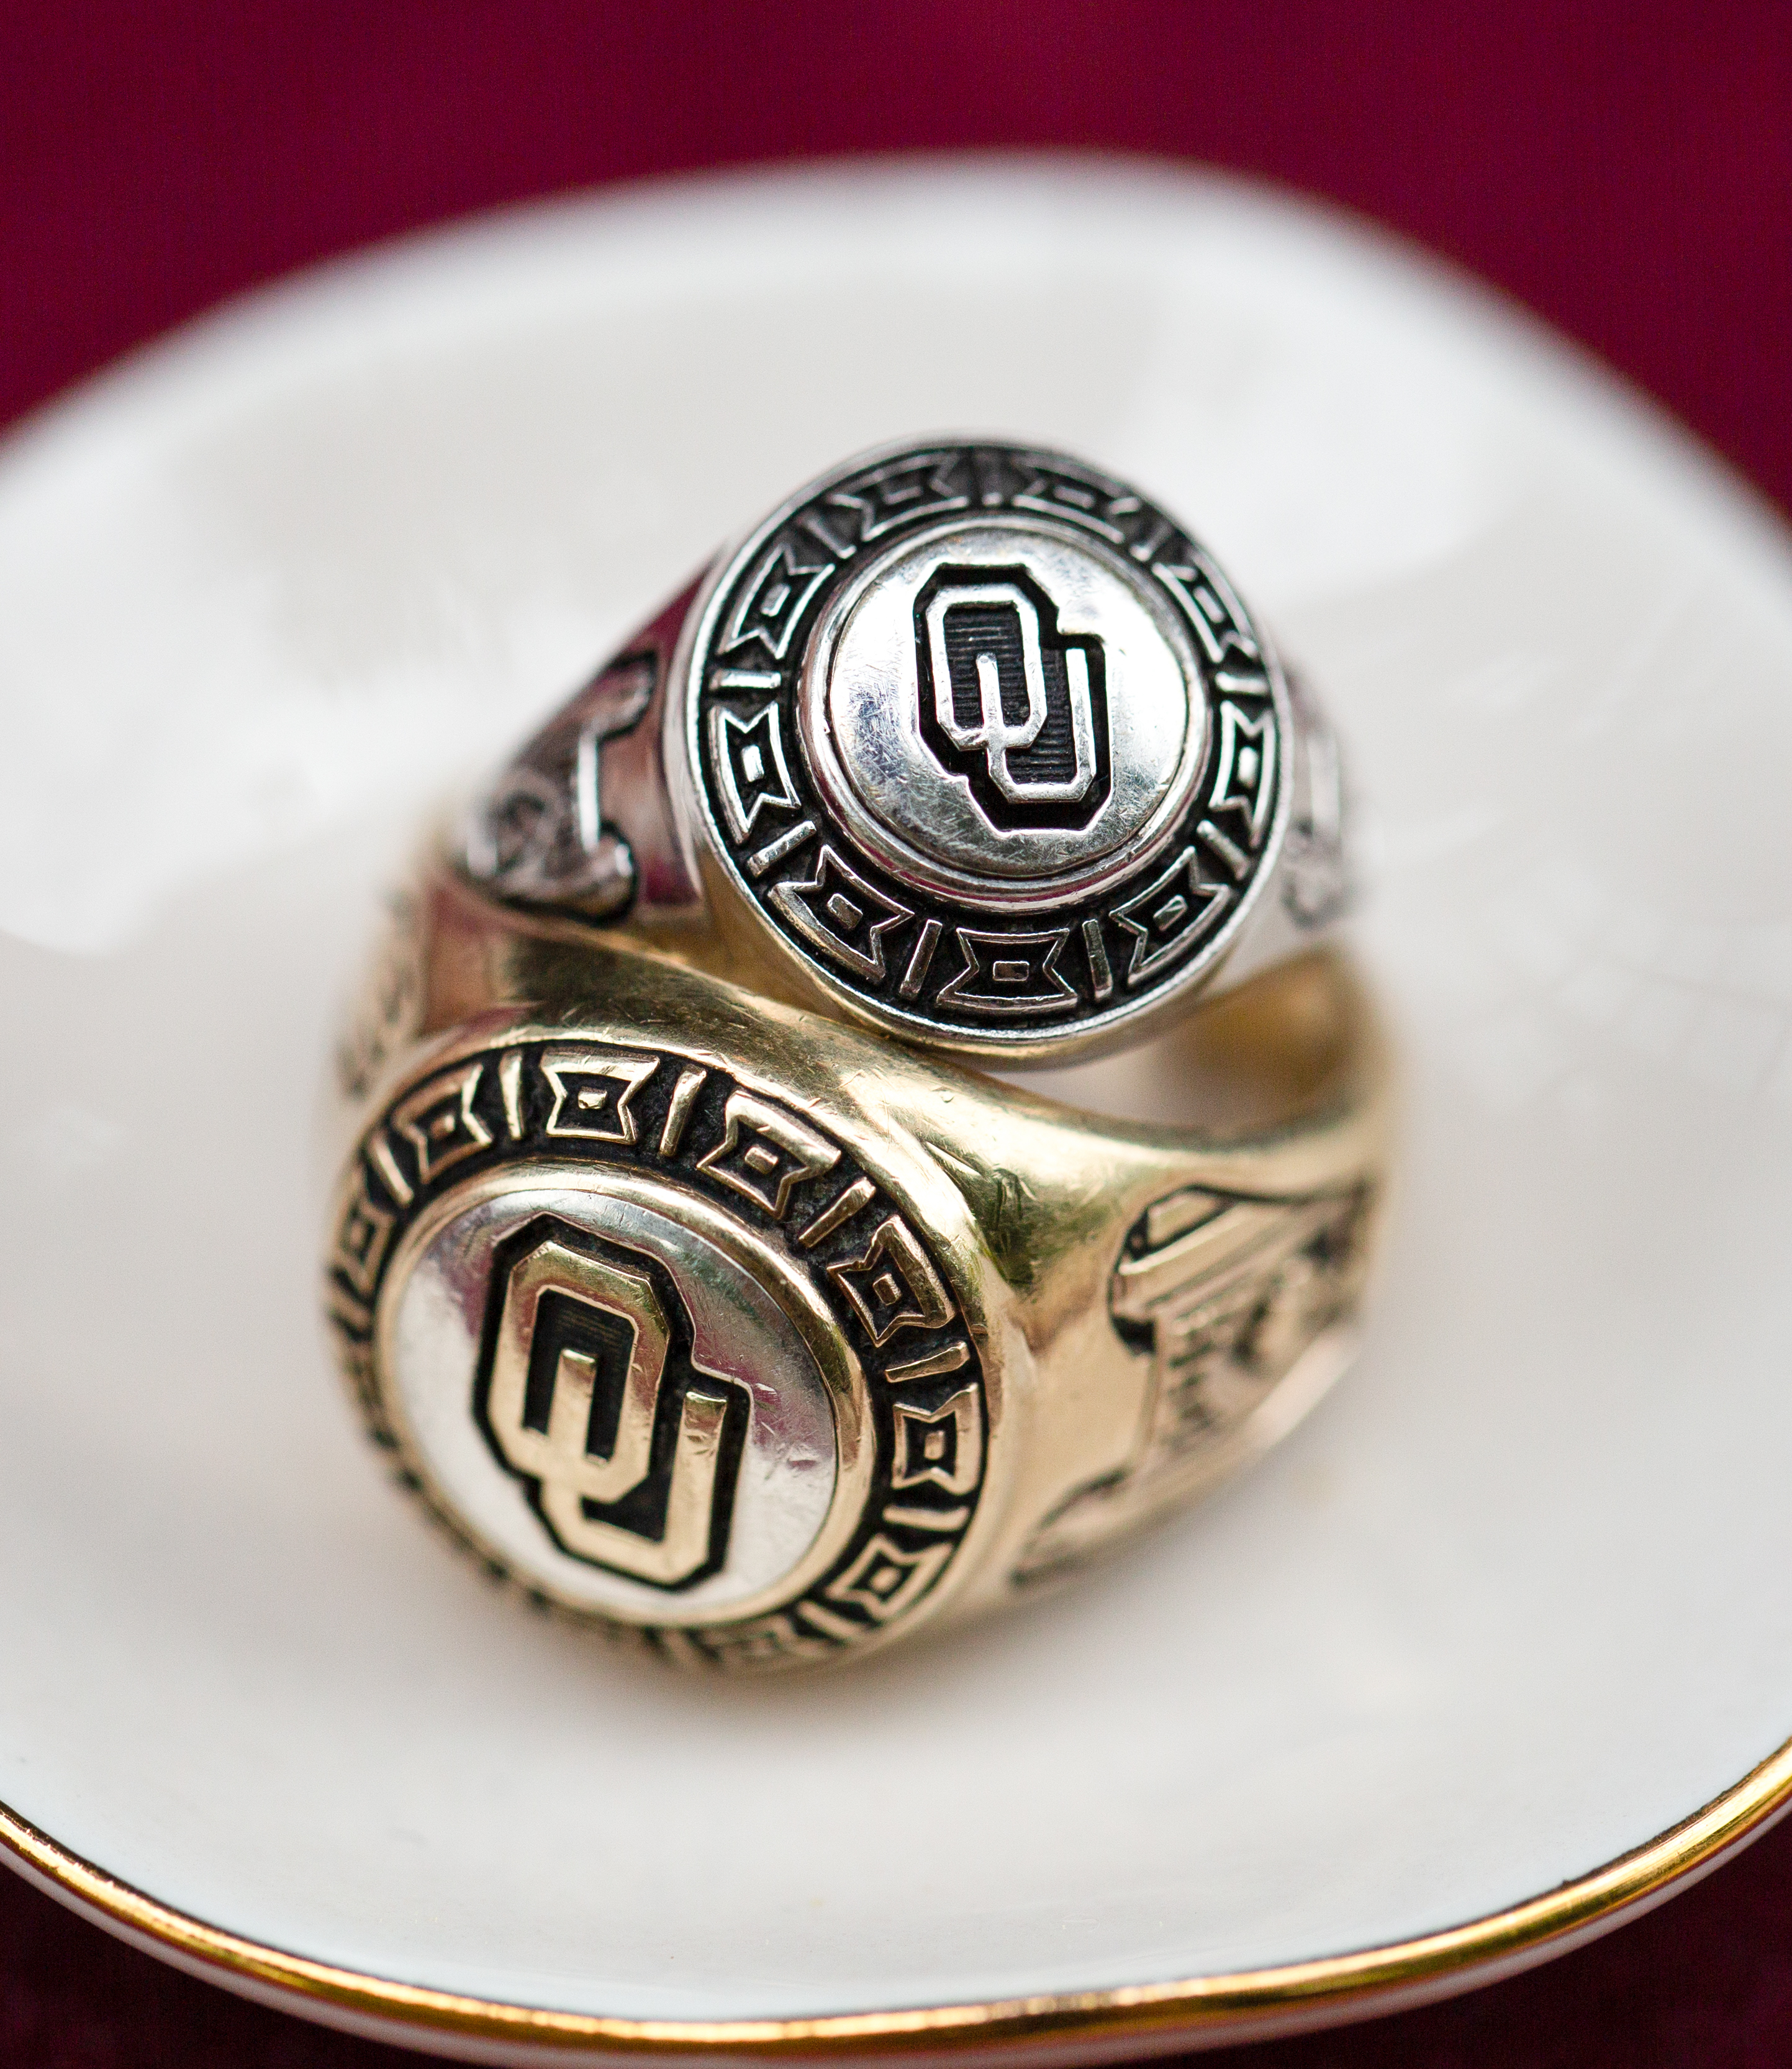 The bride and groom's college rings from University of Oklahoma.